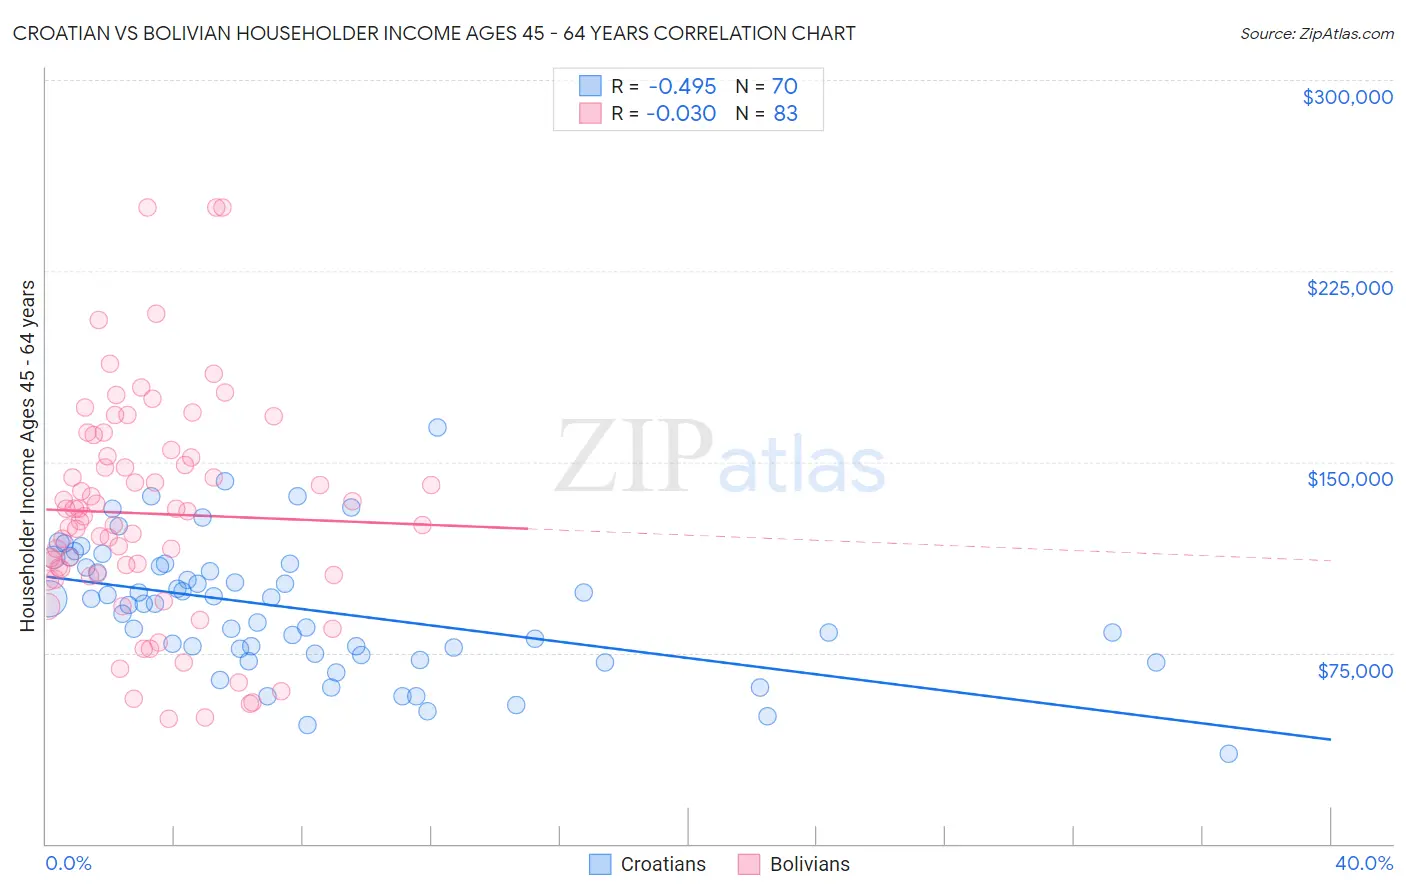 Croatian vs Bolivian Householder Income Ages 45 - 64 years